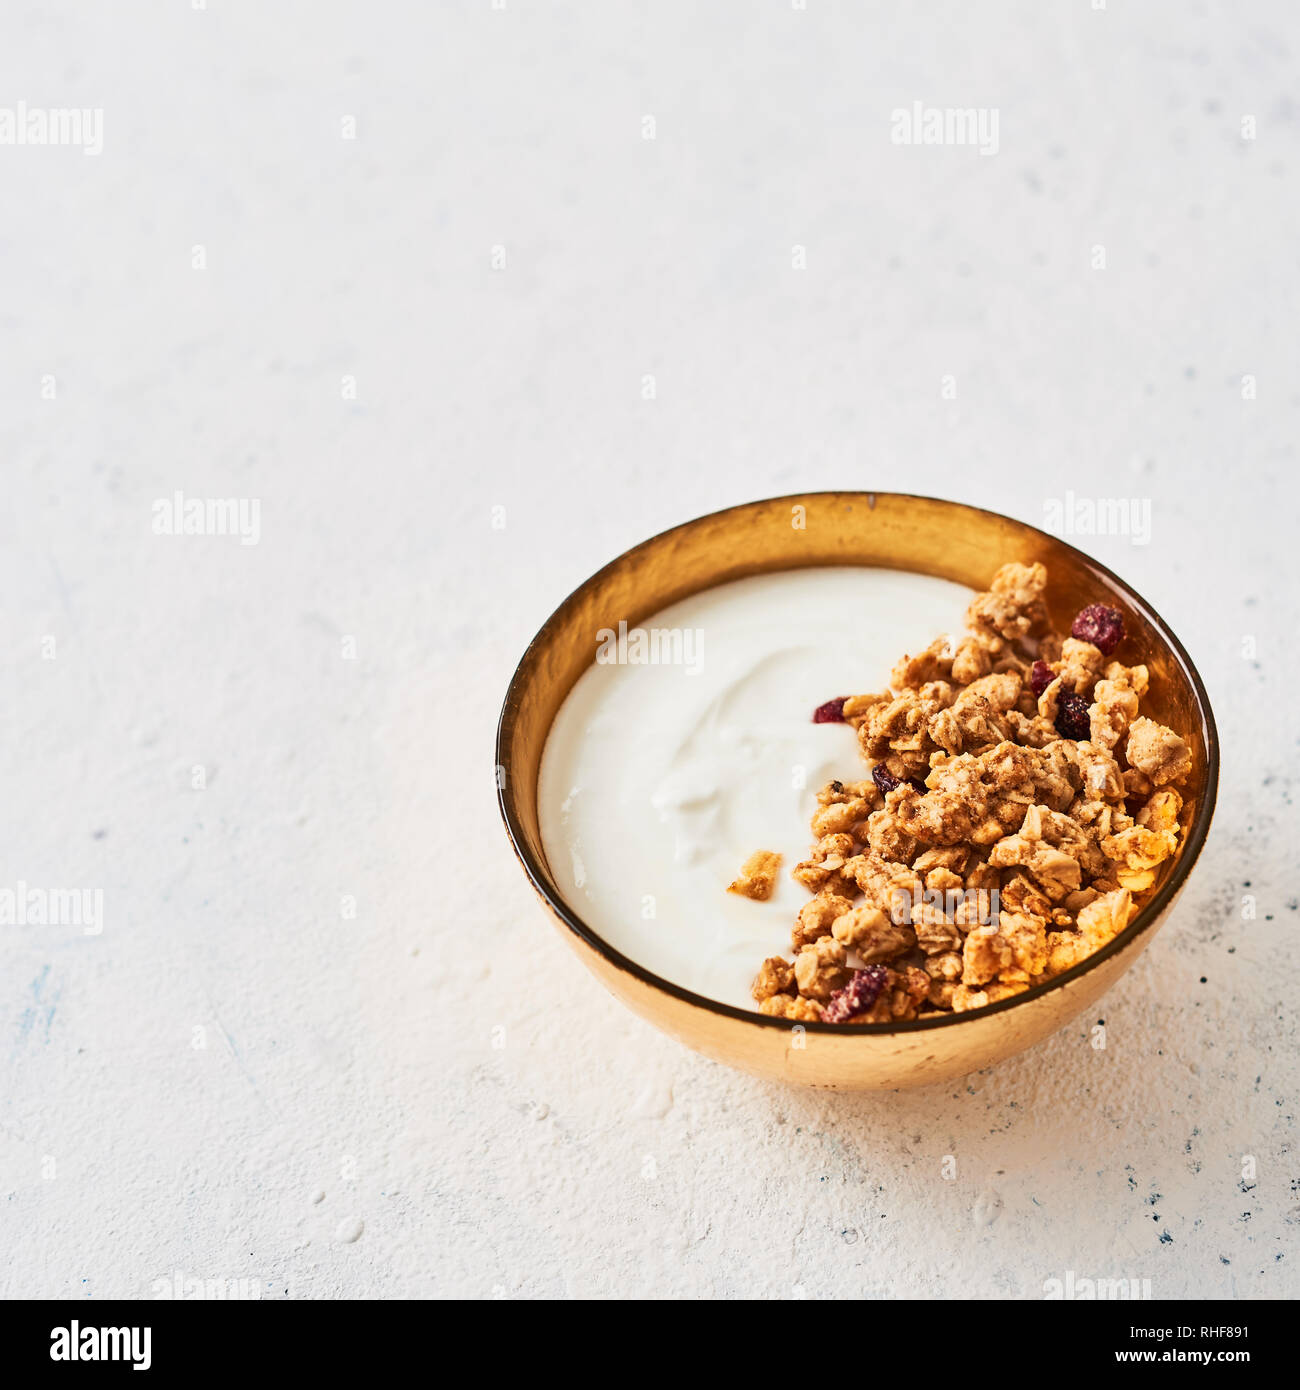 Healthy breakfast. Muesli with yogurt and honey in golden bowl on white abstract background. Top view. Square crop. Copy space for text. Stock Photo